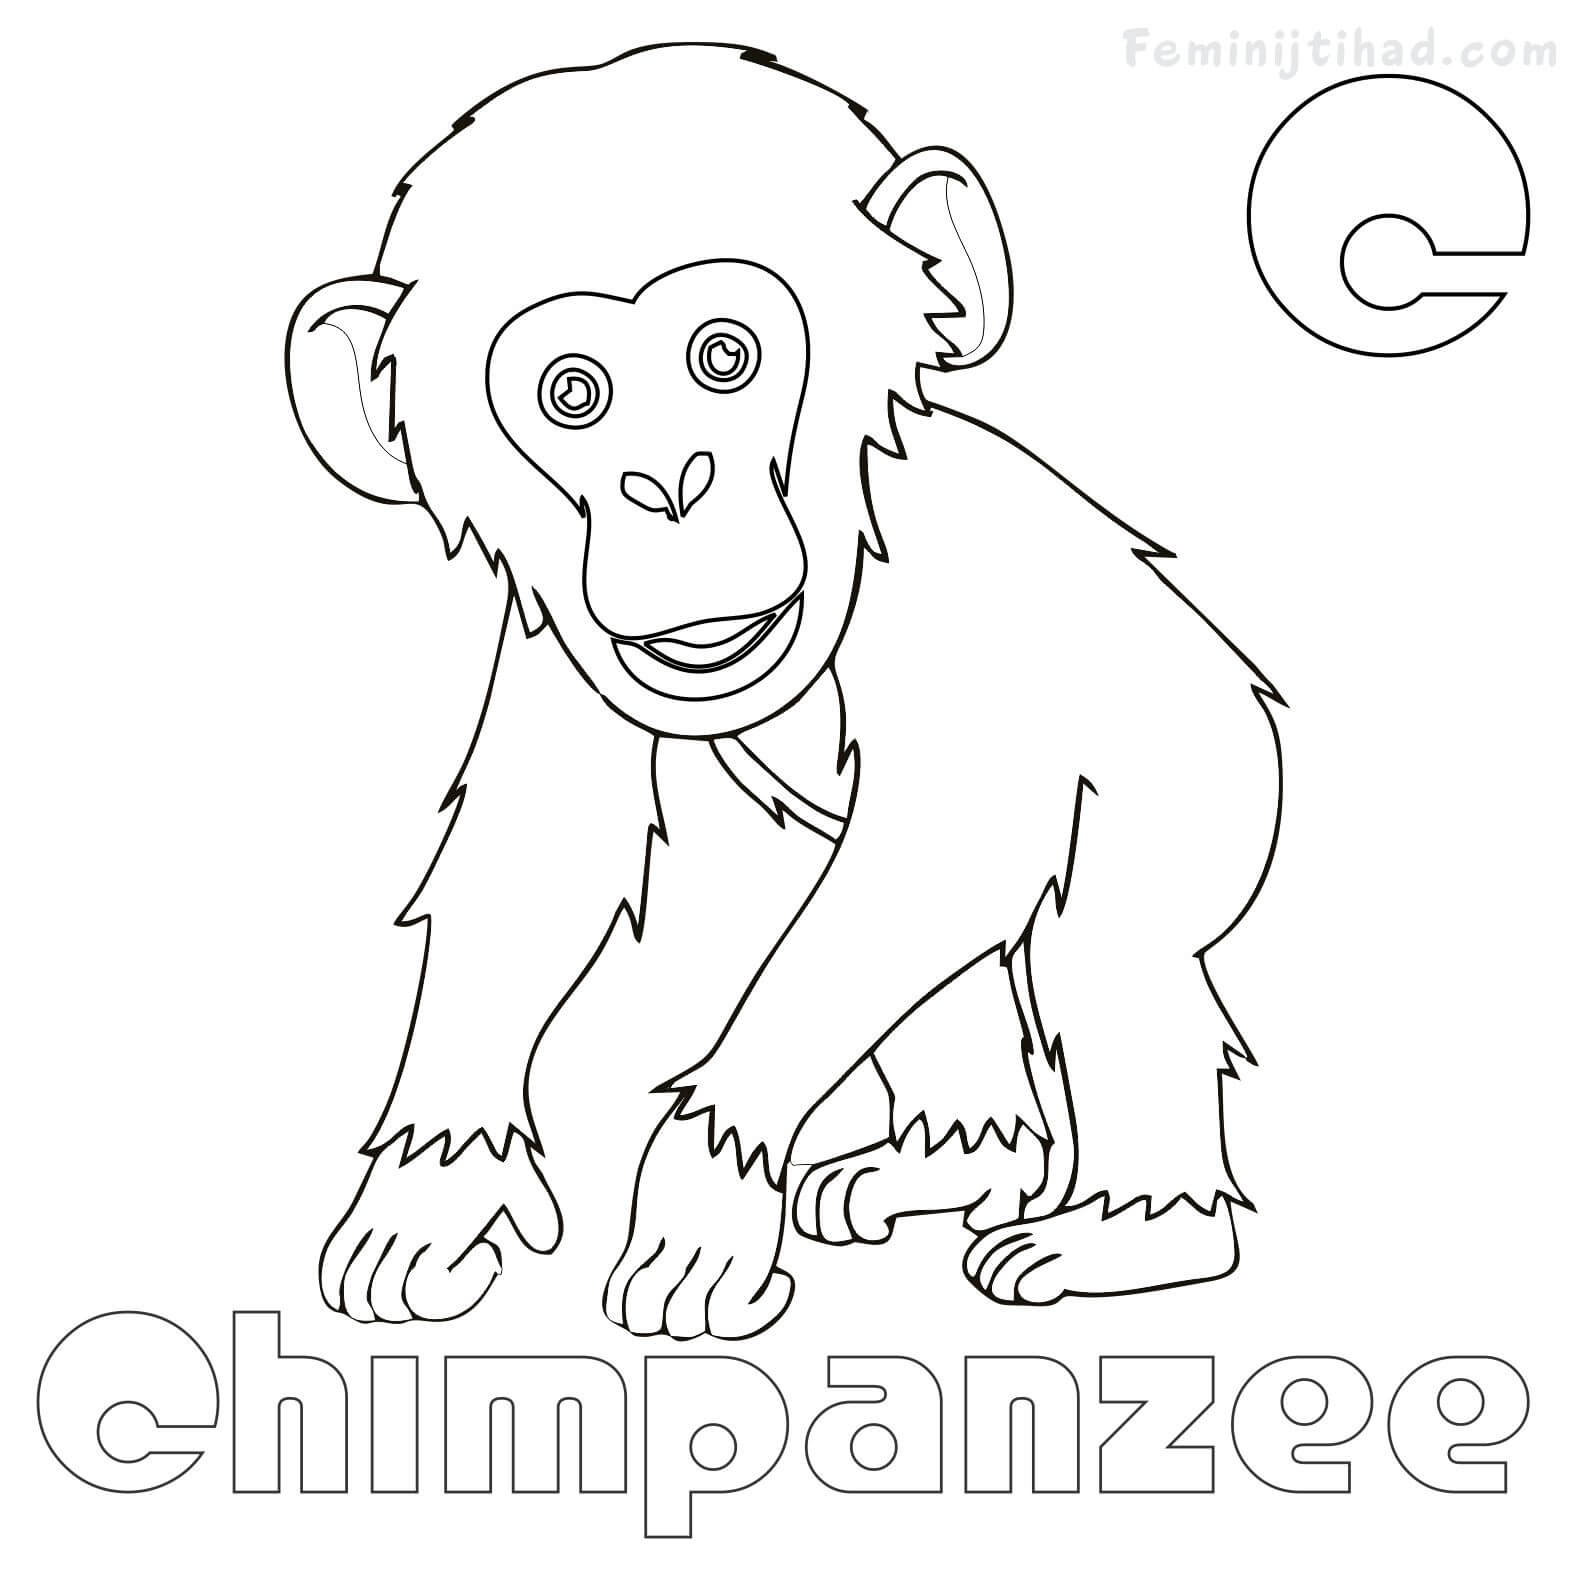 chimpanzee coloring pages online